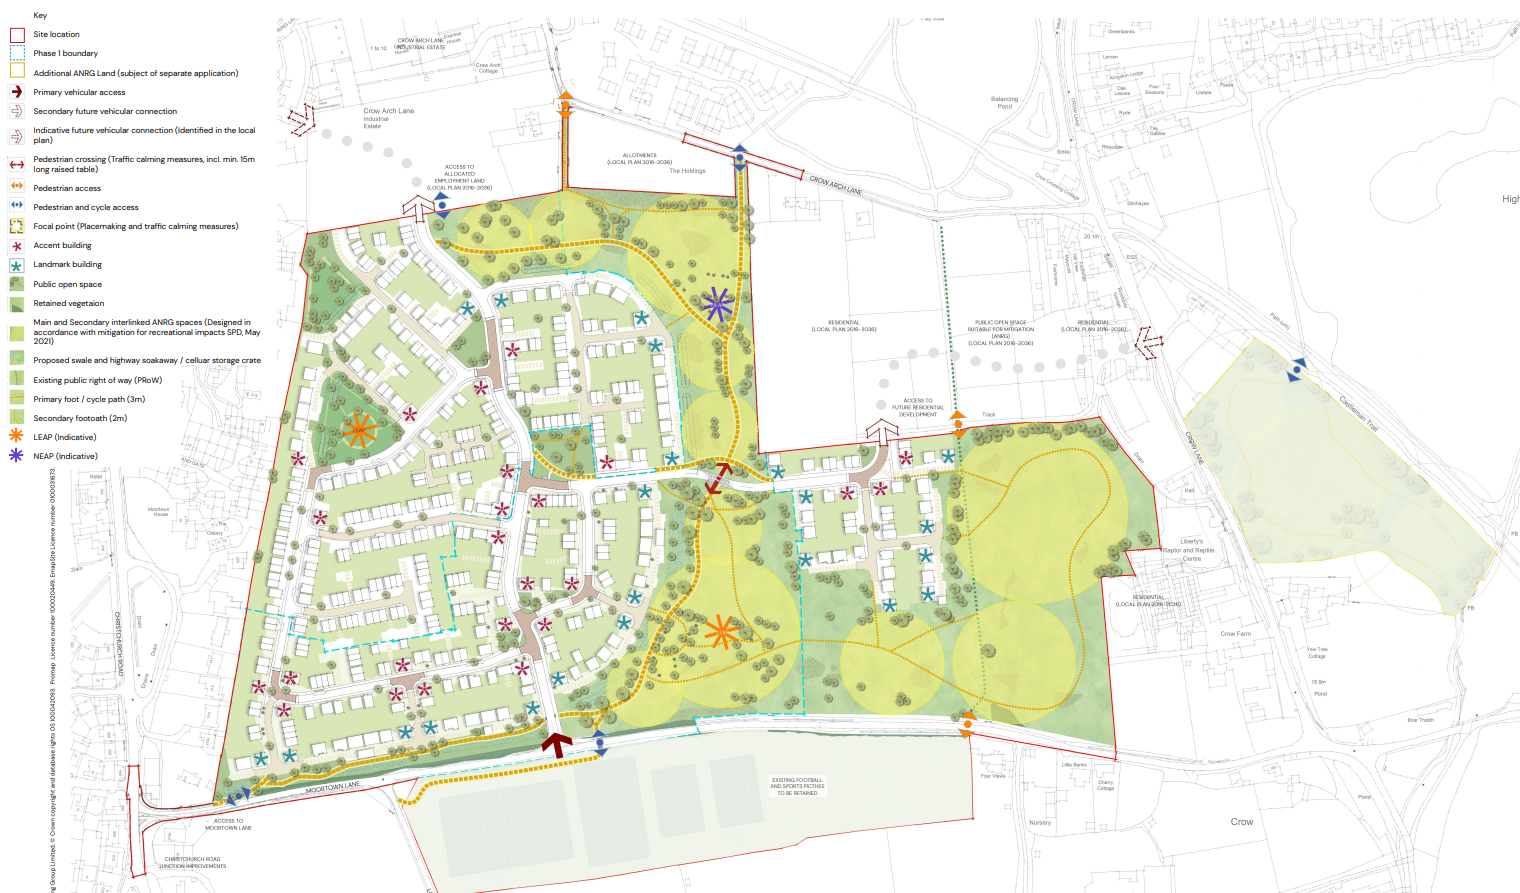 Consideration of planning application for Moortown Lane development delayed in light of new Neighbourhood Plan